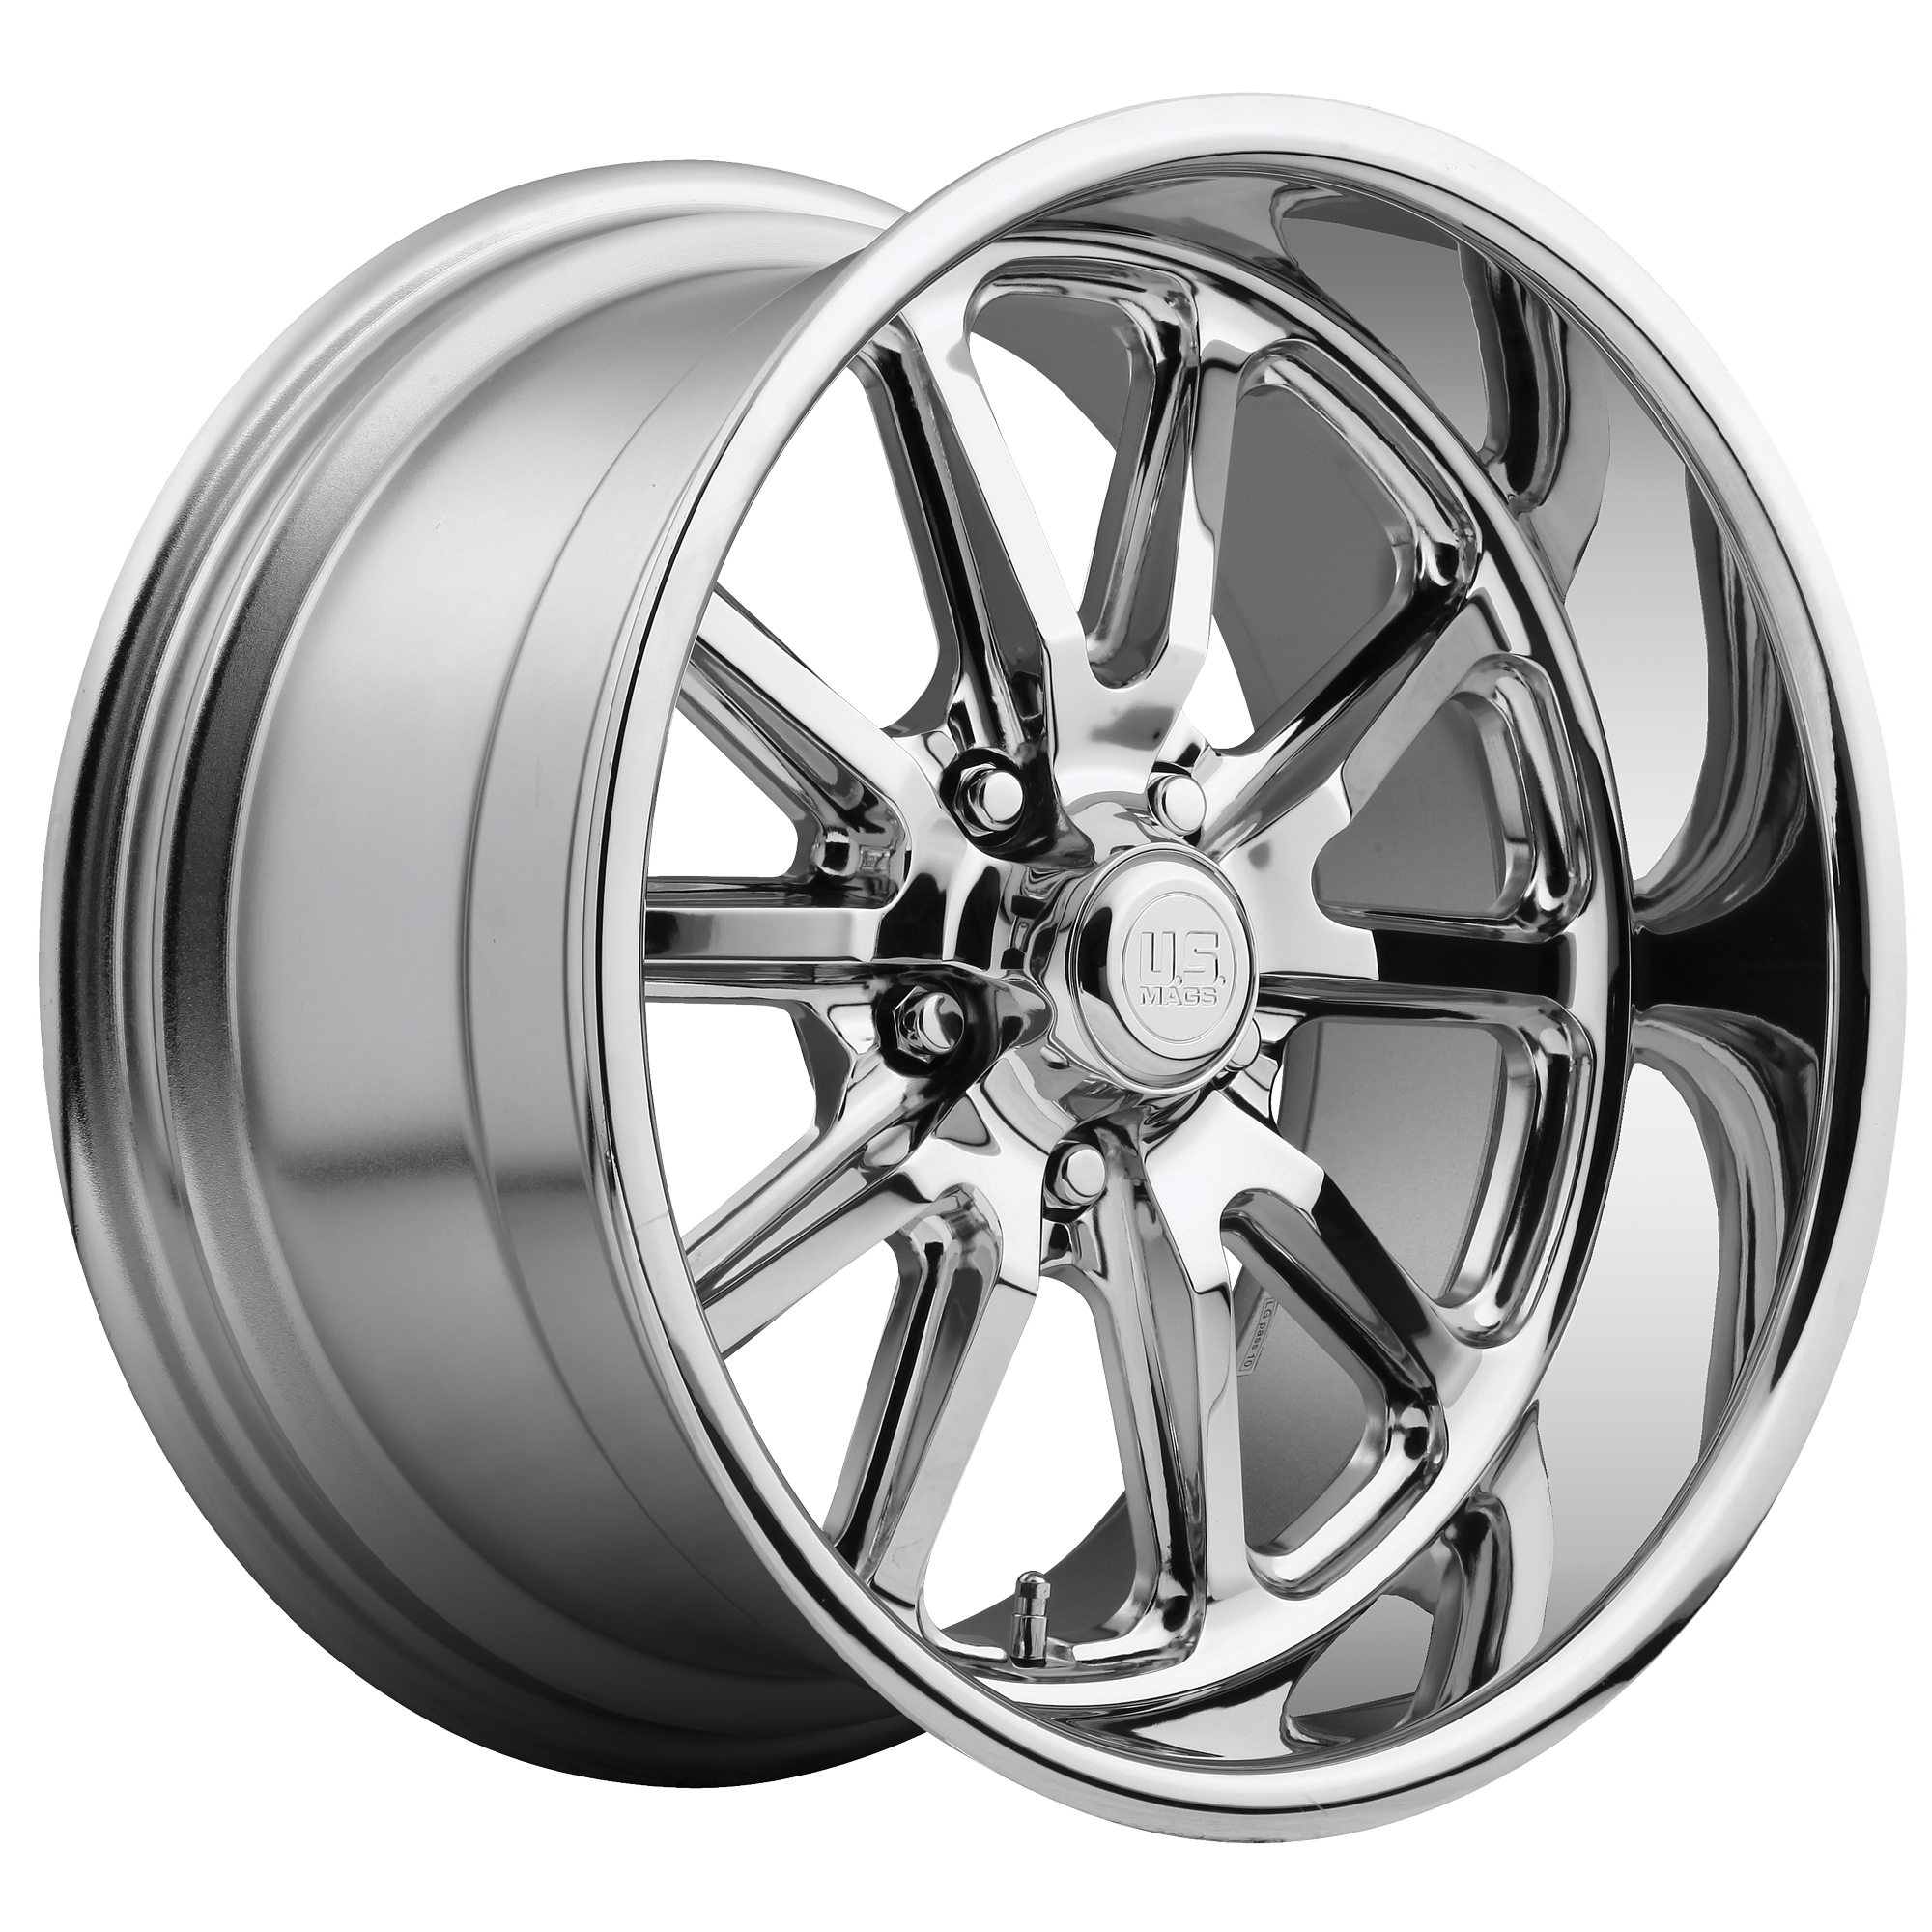 RAMBLER 18x9.5 5x114.30 CHROME PLATED (1 mm) - Tires and Engine Performance